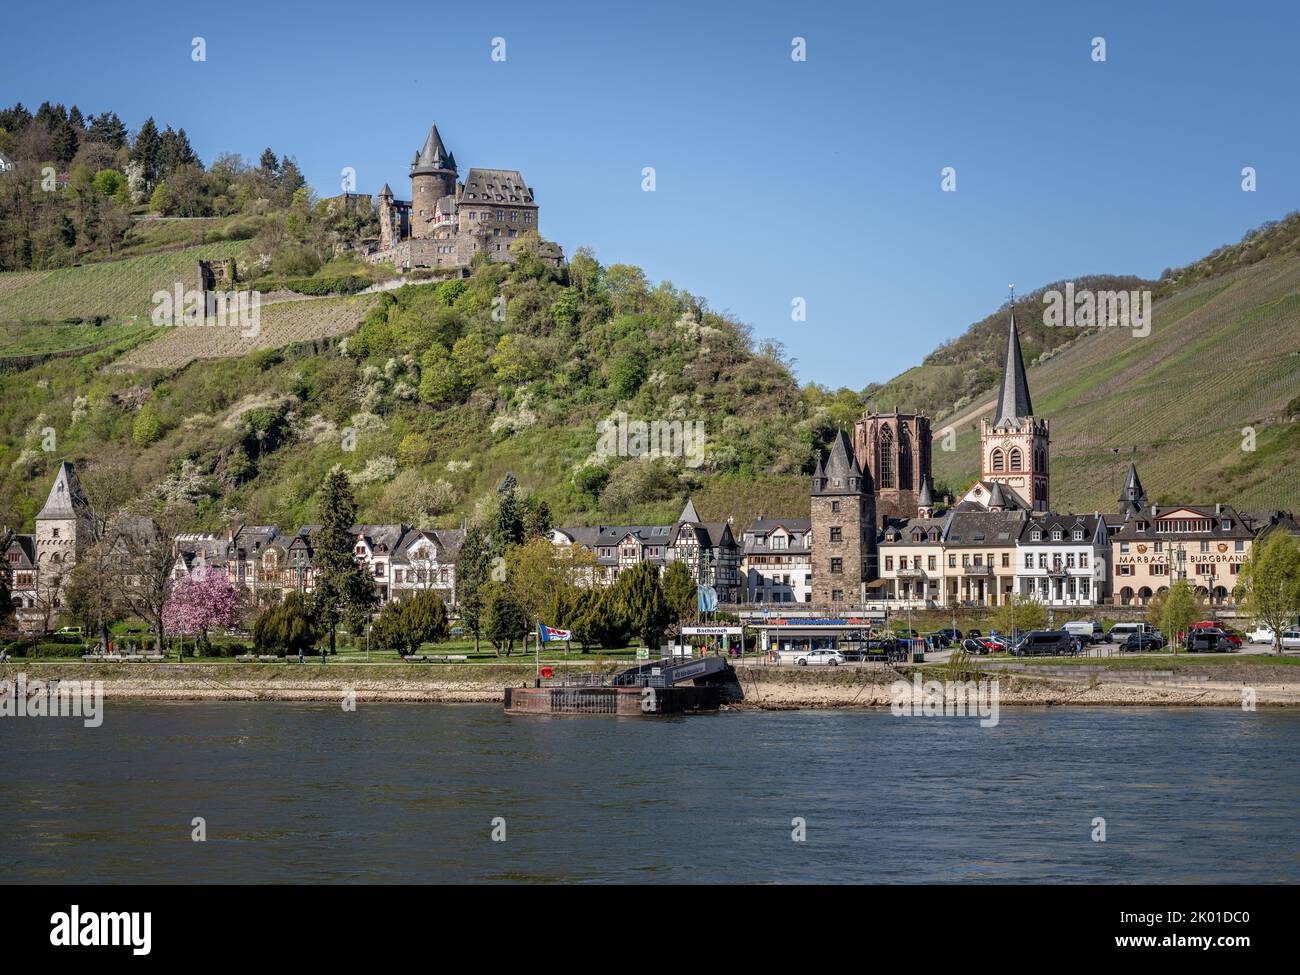 The town of Bacharach with Stahleck Castle, the church of St. Peter and the ruins of Wernerkapelle. Stock Photo